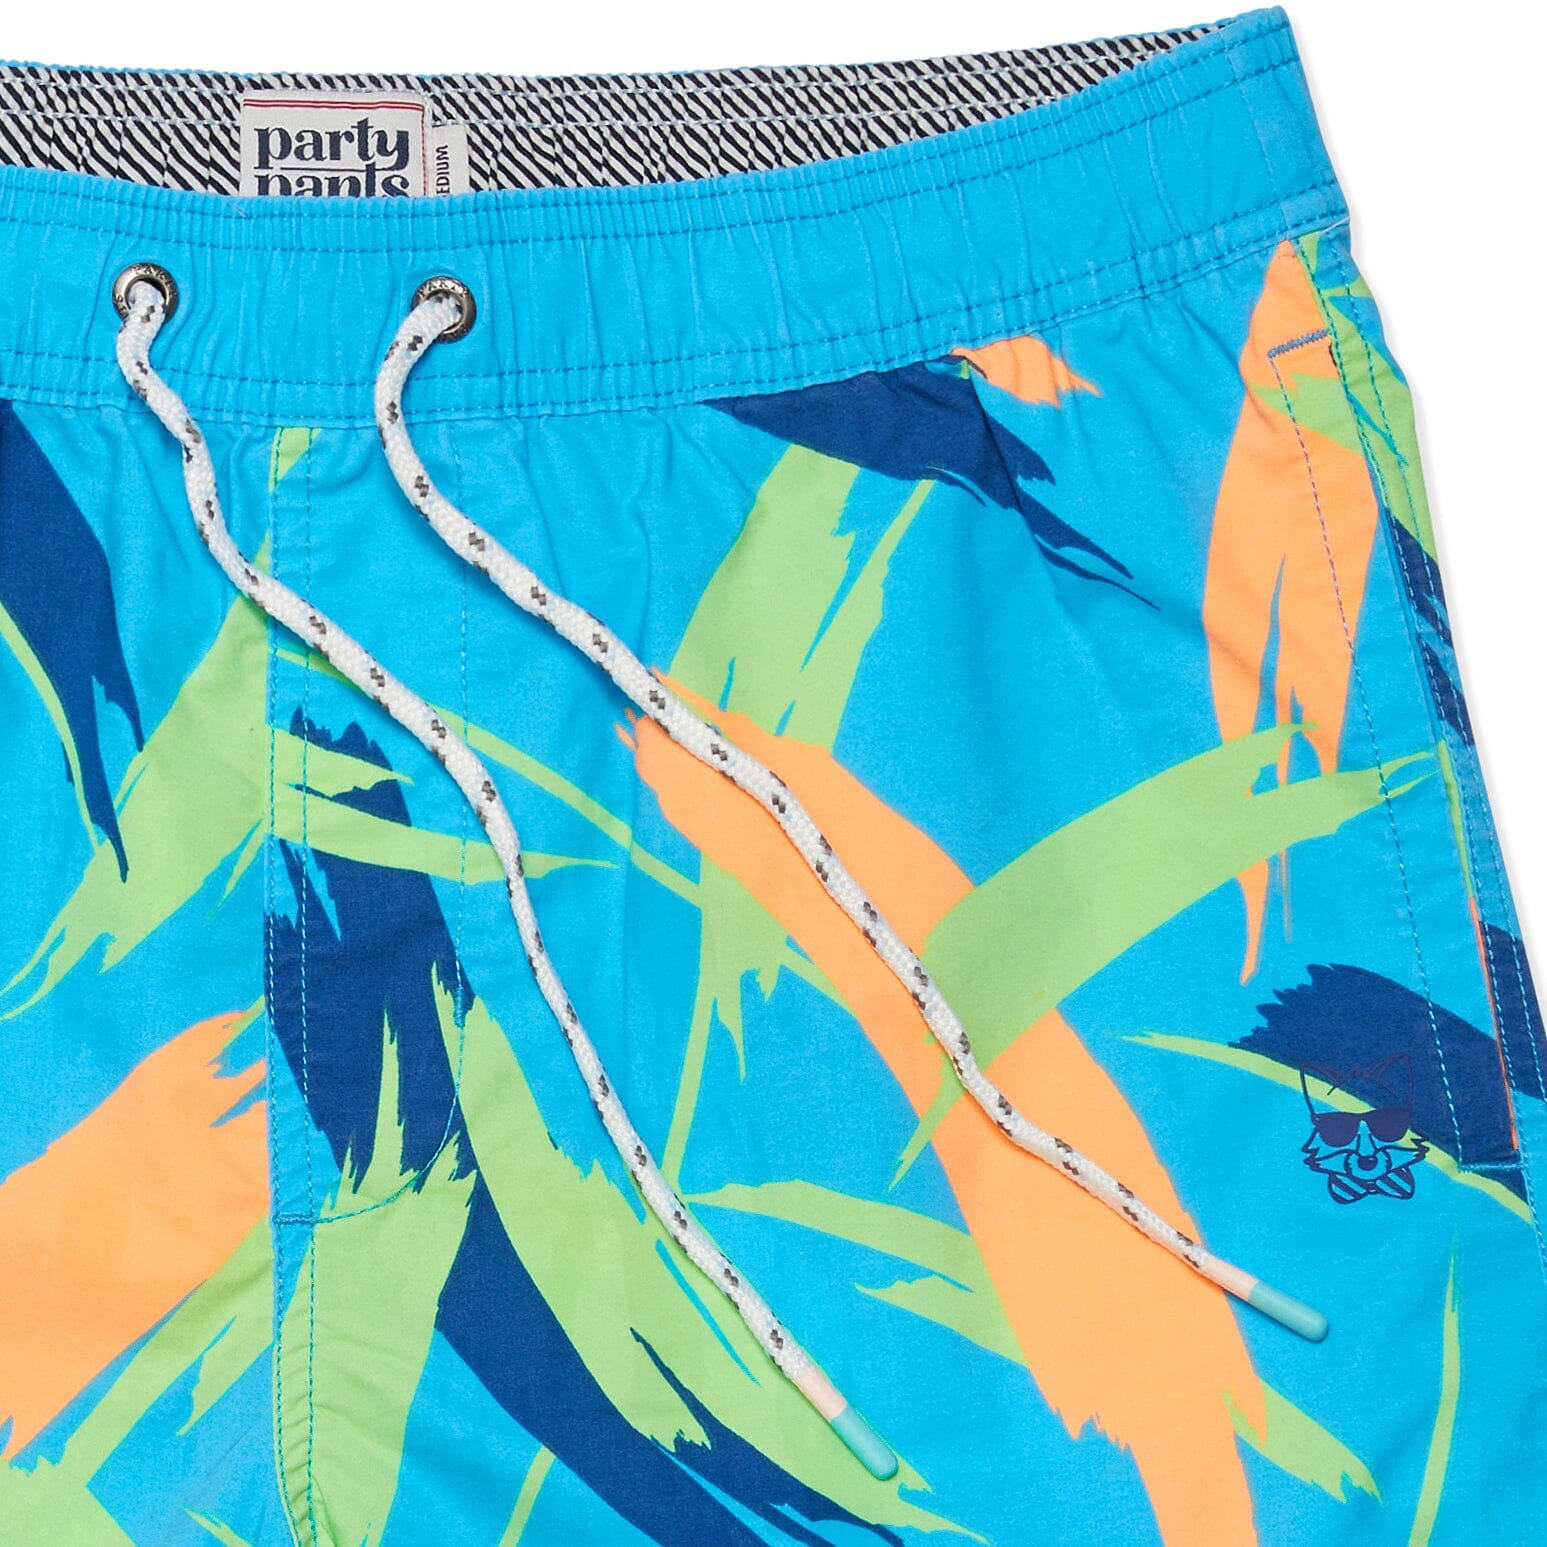 STROKER PARTY STARTER SHORT - NEON BLUE PRINTED SHORTS PARTY PANTS 